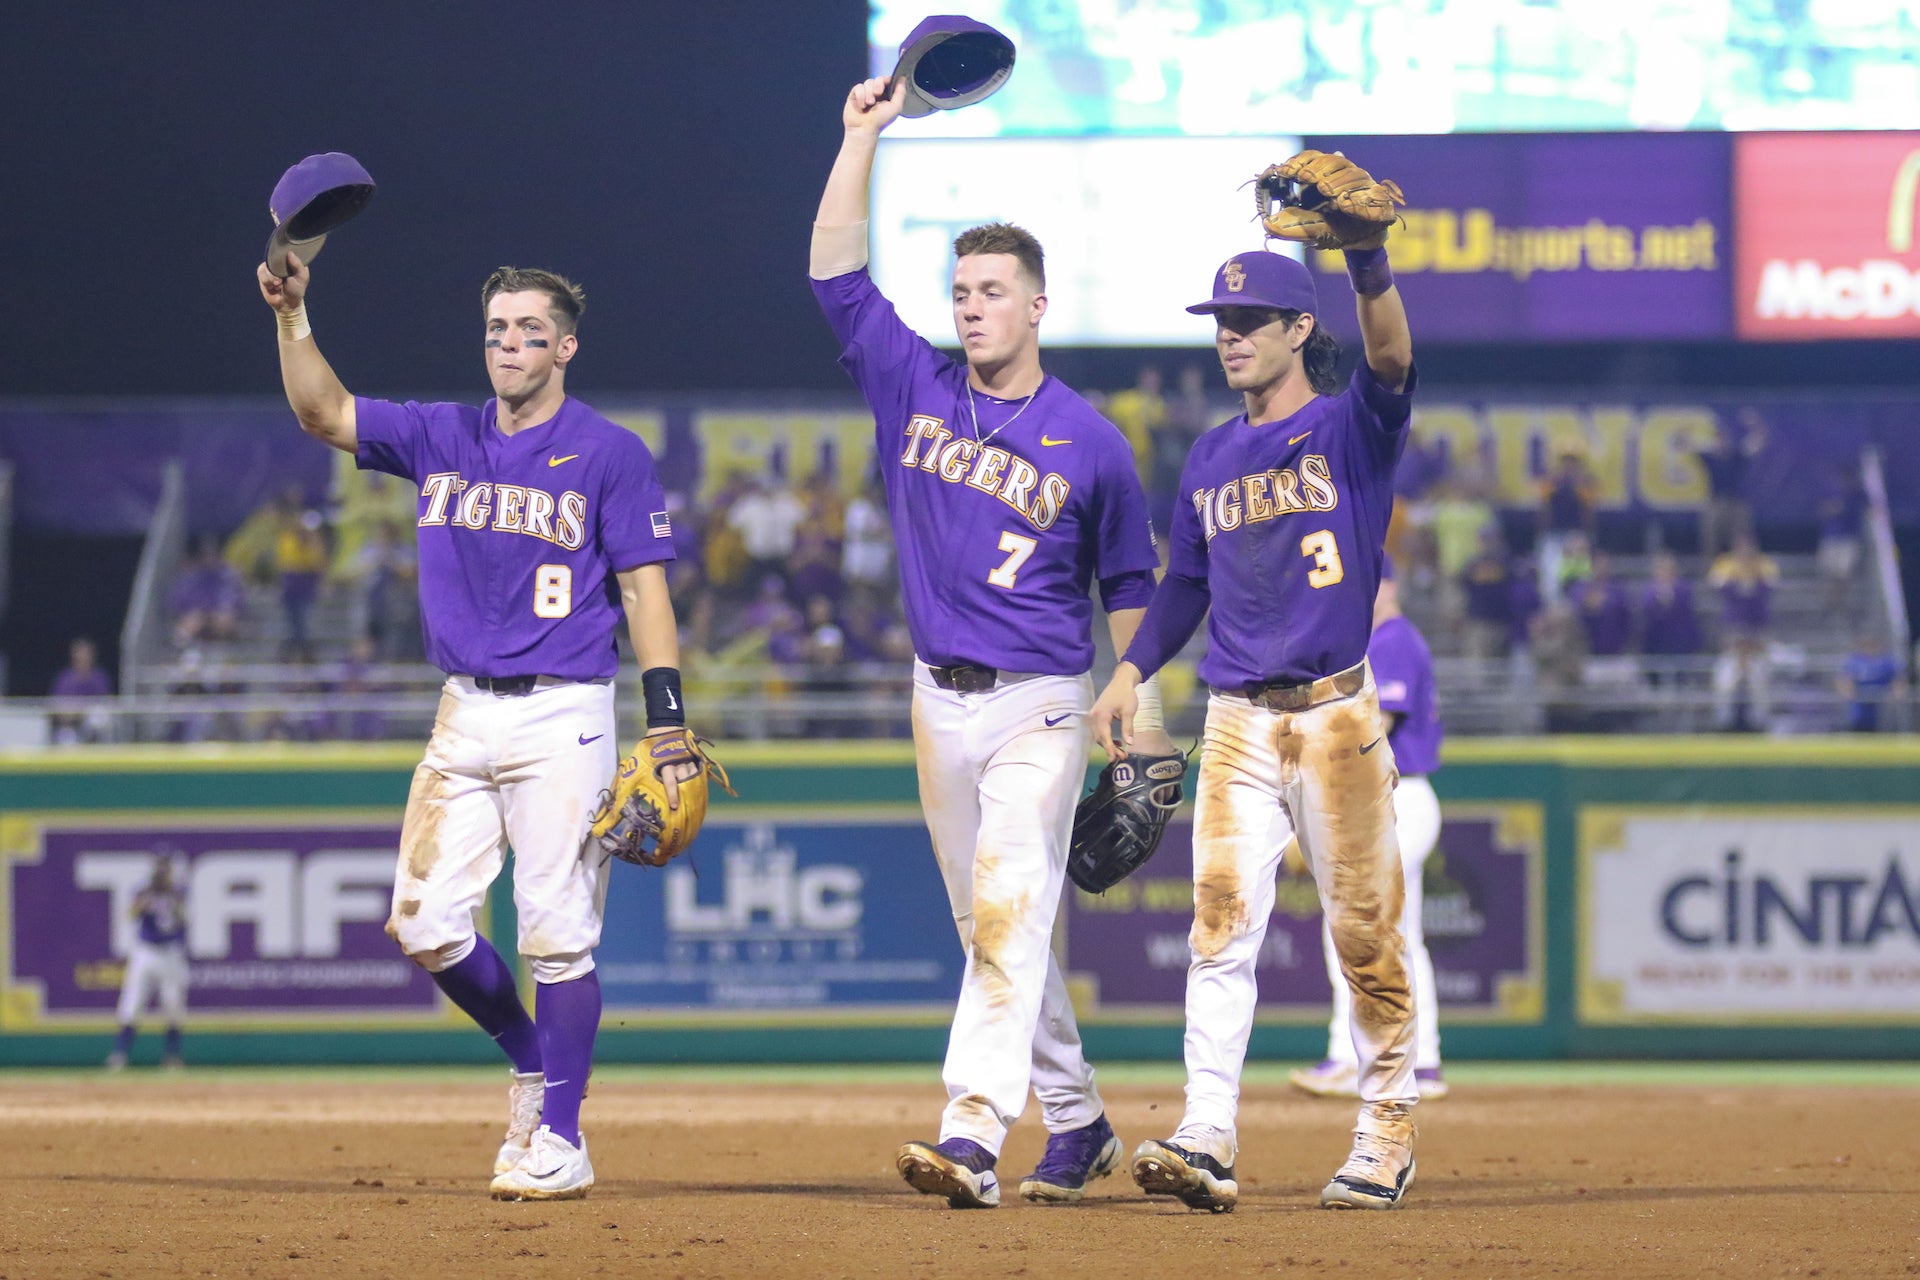 We were resilient': Storm, Fox lead Duke baseball to crucial win